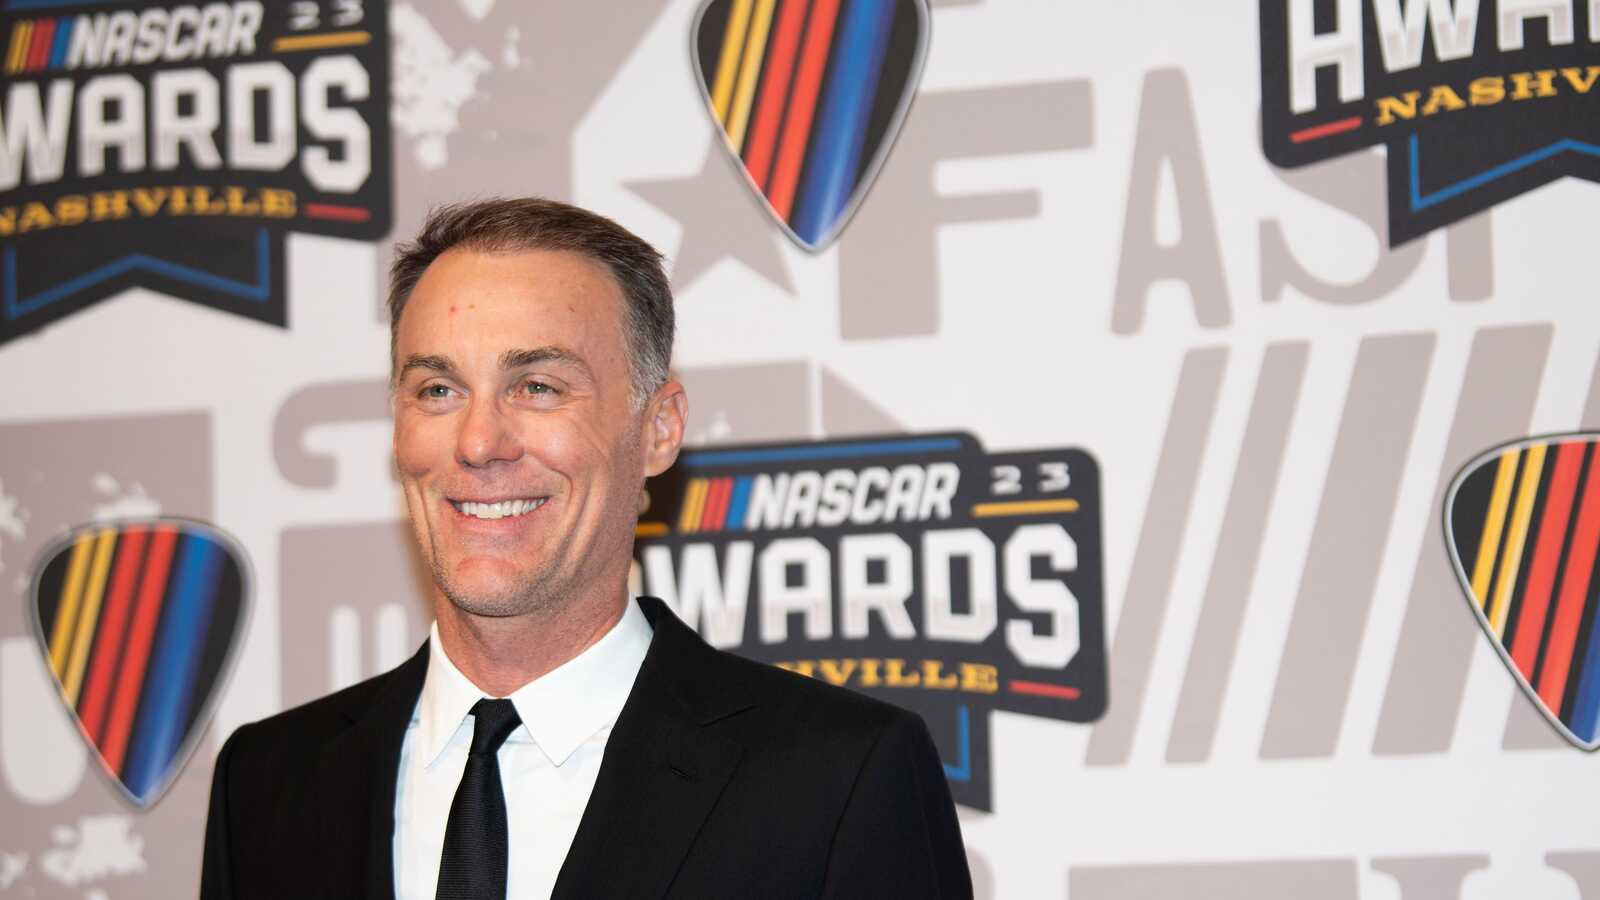 Kevin Harvick reveals the 'benchmark' for Bubba Wallace ahead of Kansas Cup race